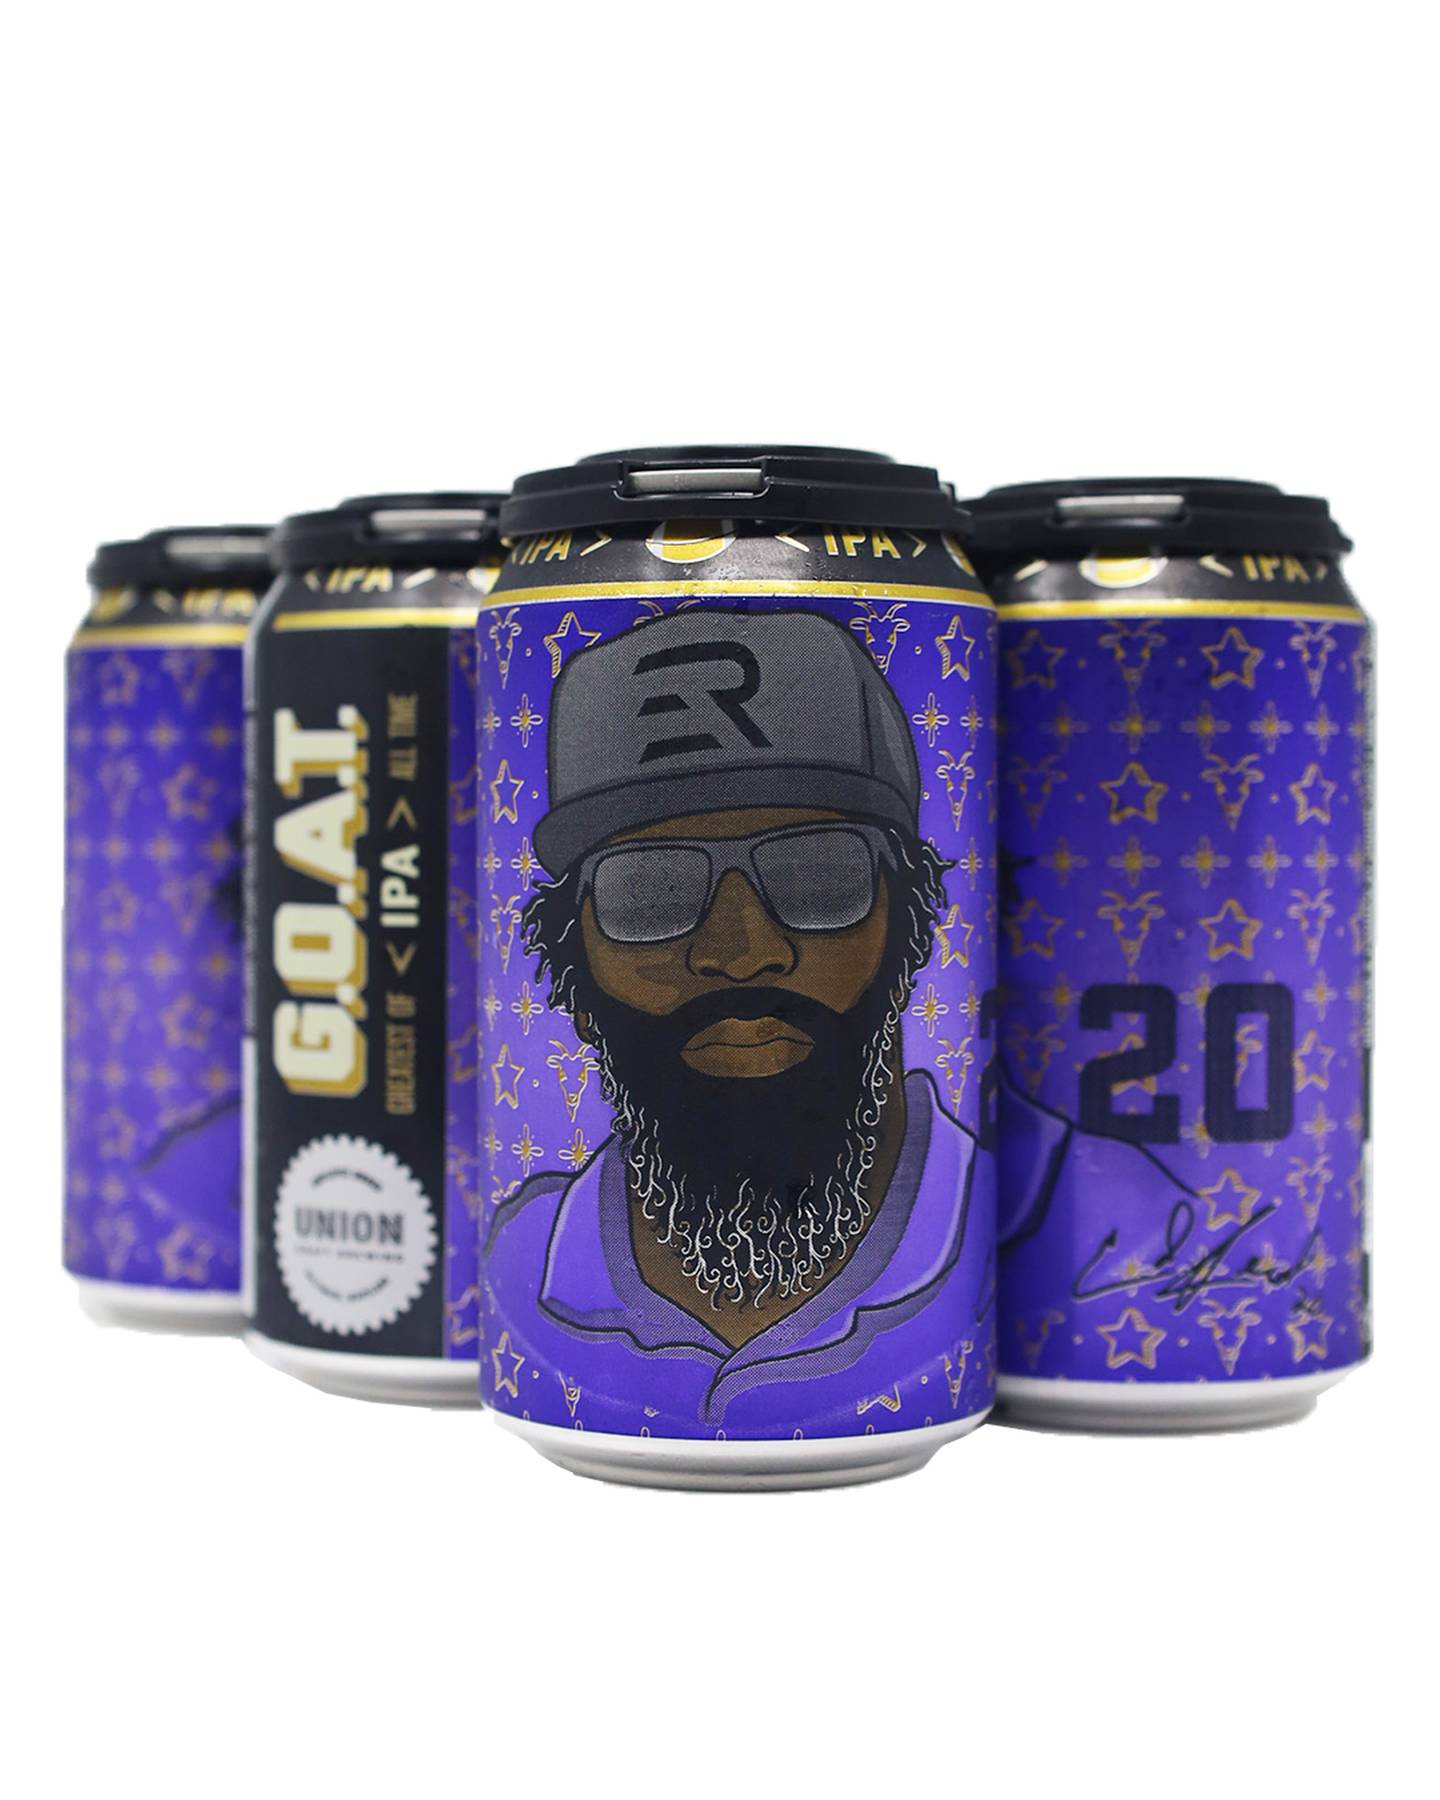 Baltimore's UNION Craft Brewing released “G.O.A.T. IPA” in honor of Ravens Hall of Fame safety Ed Reed. Handout photo courtesy of Union Craft Brewing.